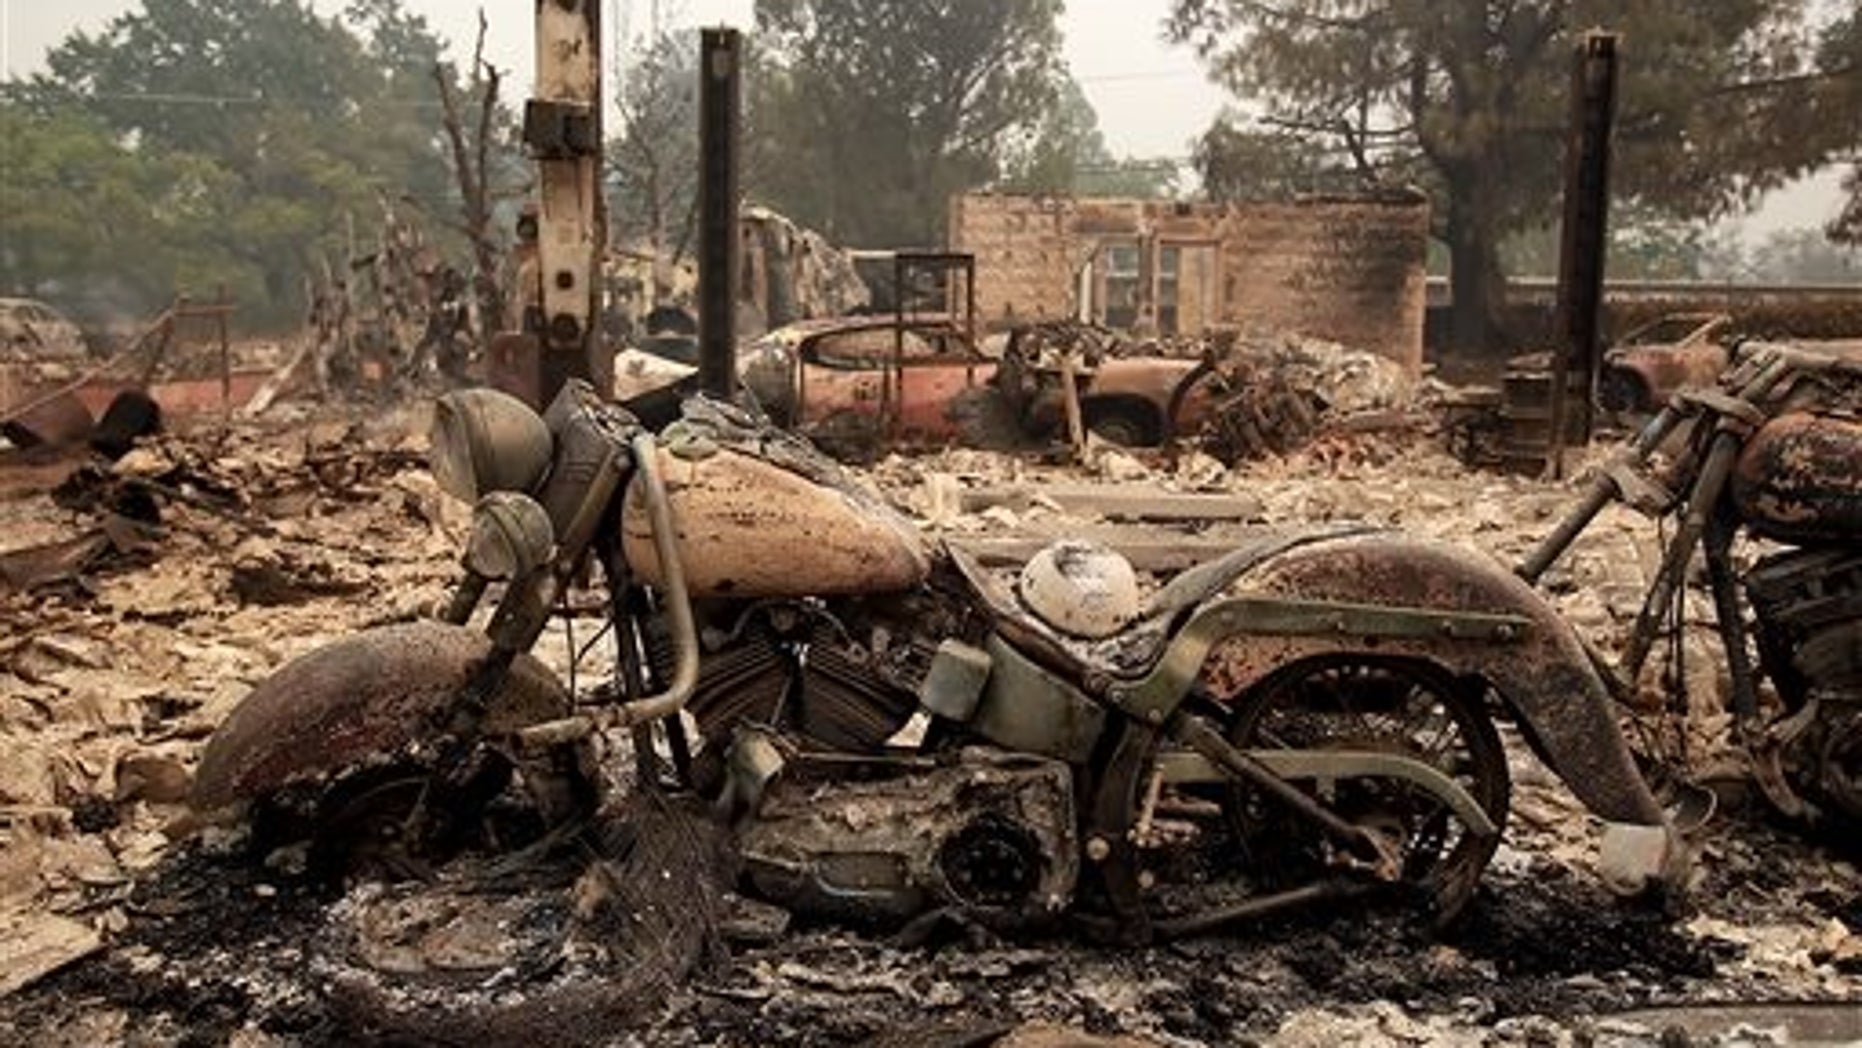 Apocalyptic Scene In California As Wildfires Burn Hundreds Of Homes